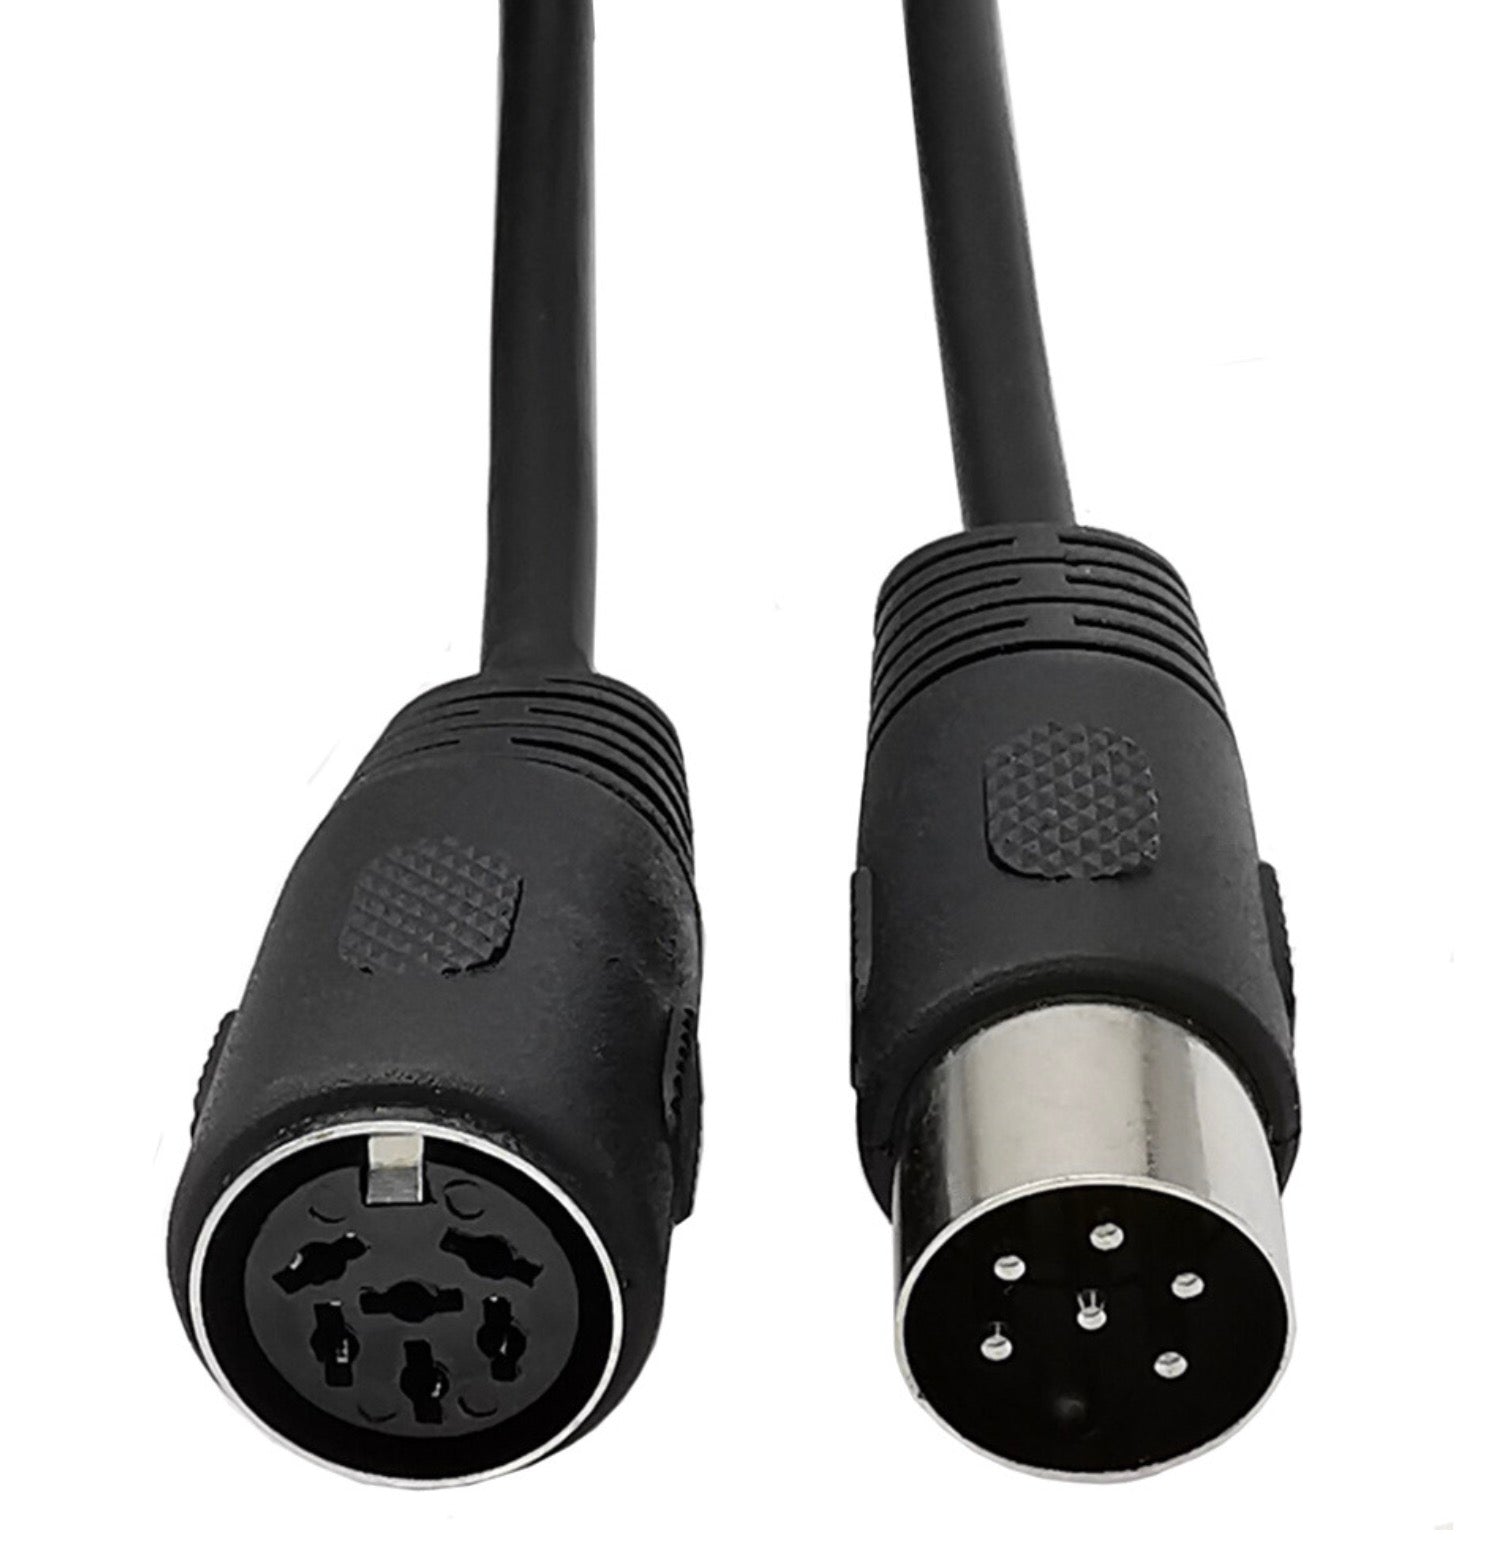 6-Pin Din Male to Female Audio Adapter Cable